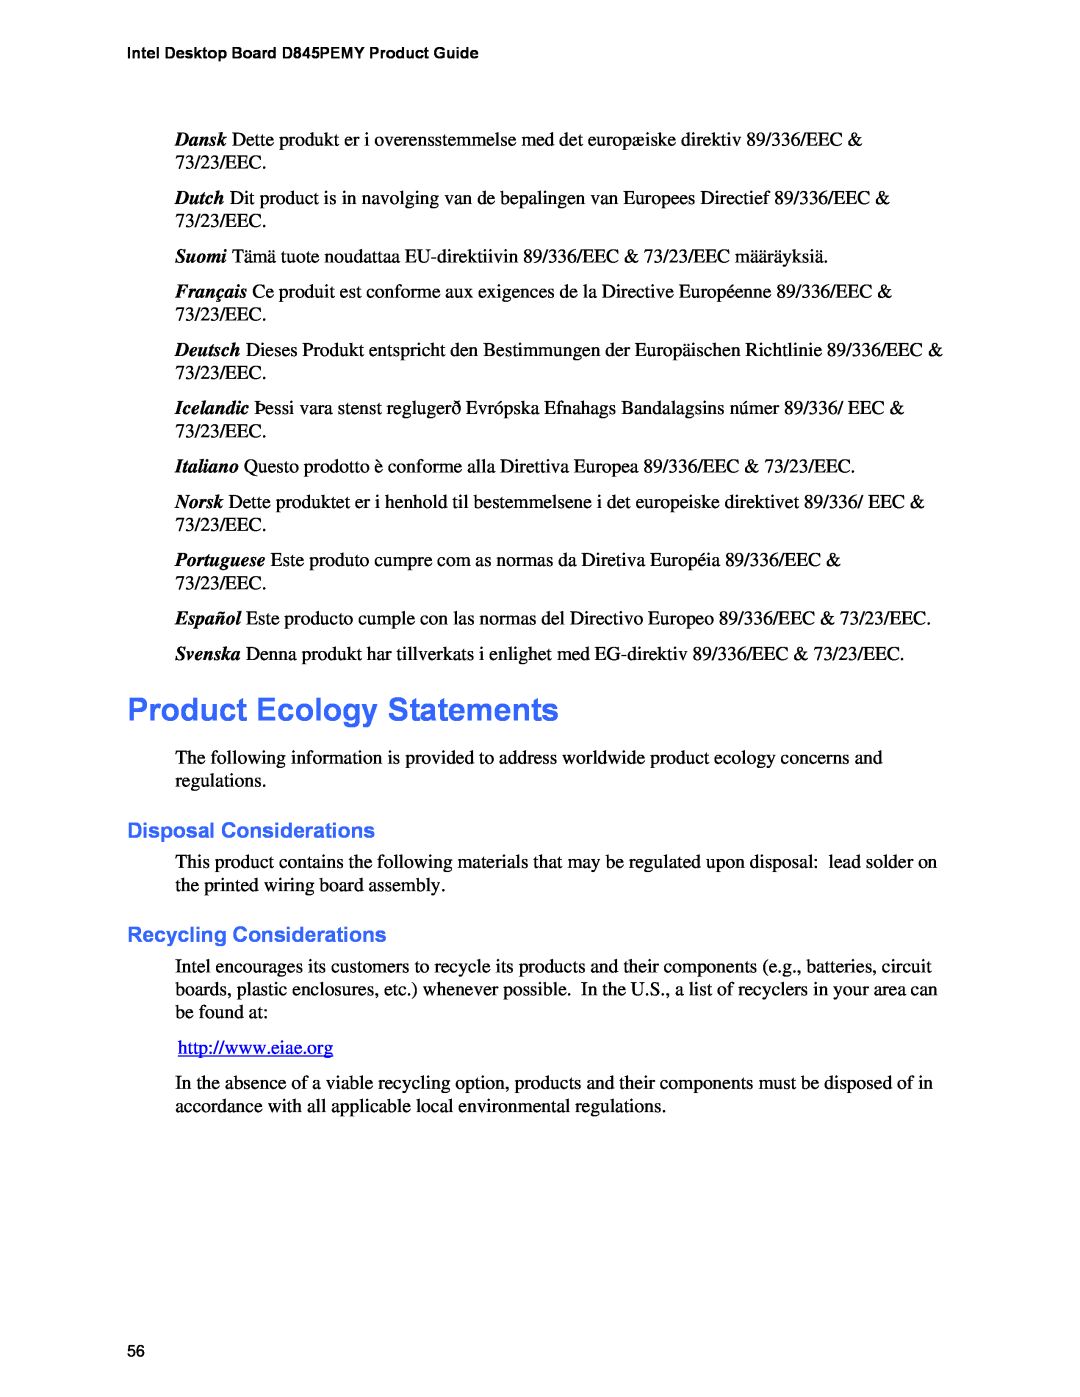 Intel D845PEMY manual Product Ecology Statements, Disposal Considerations, Recycling Considerations 